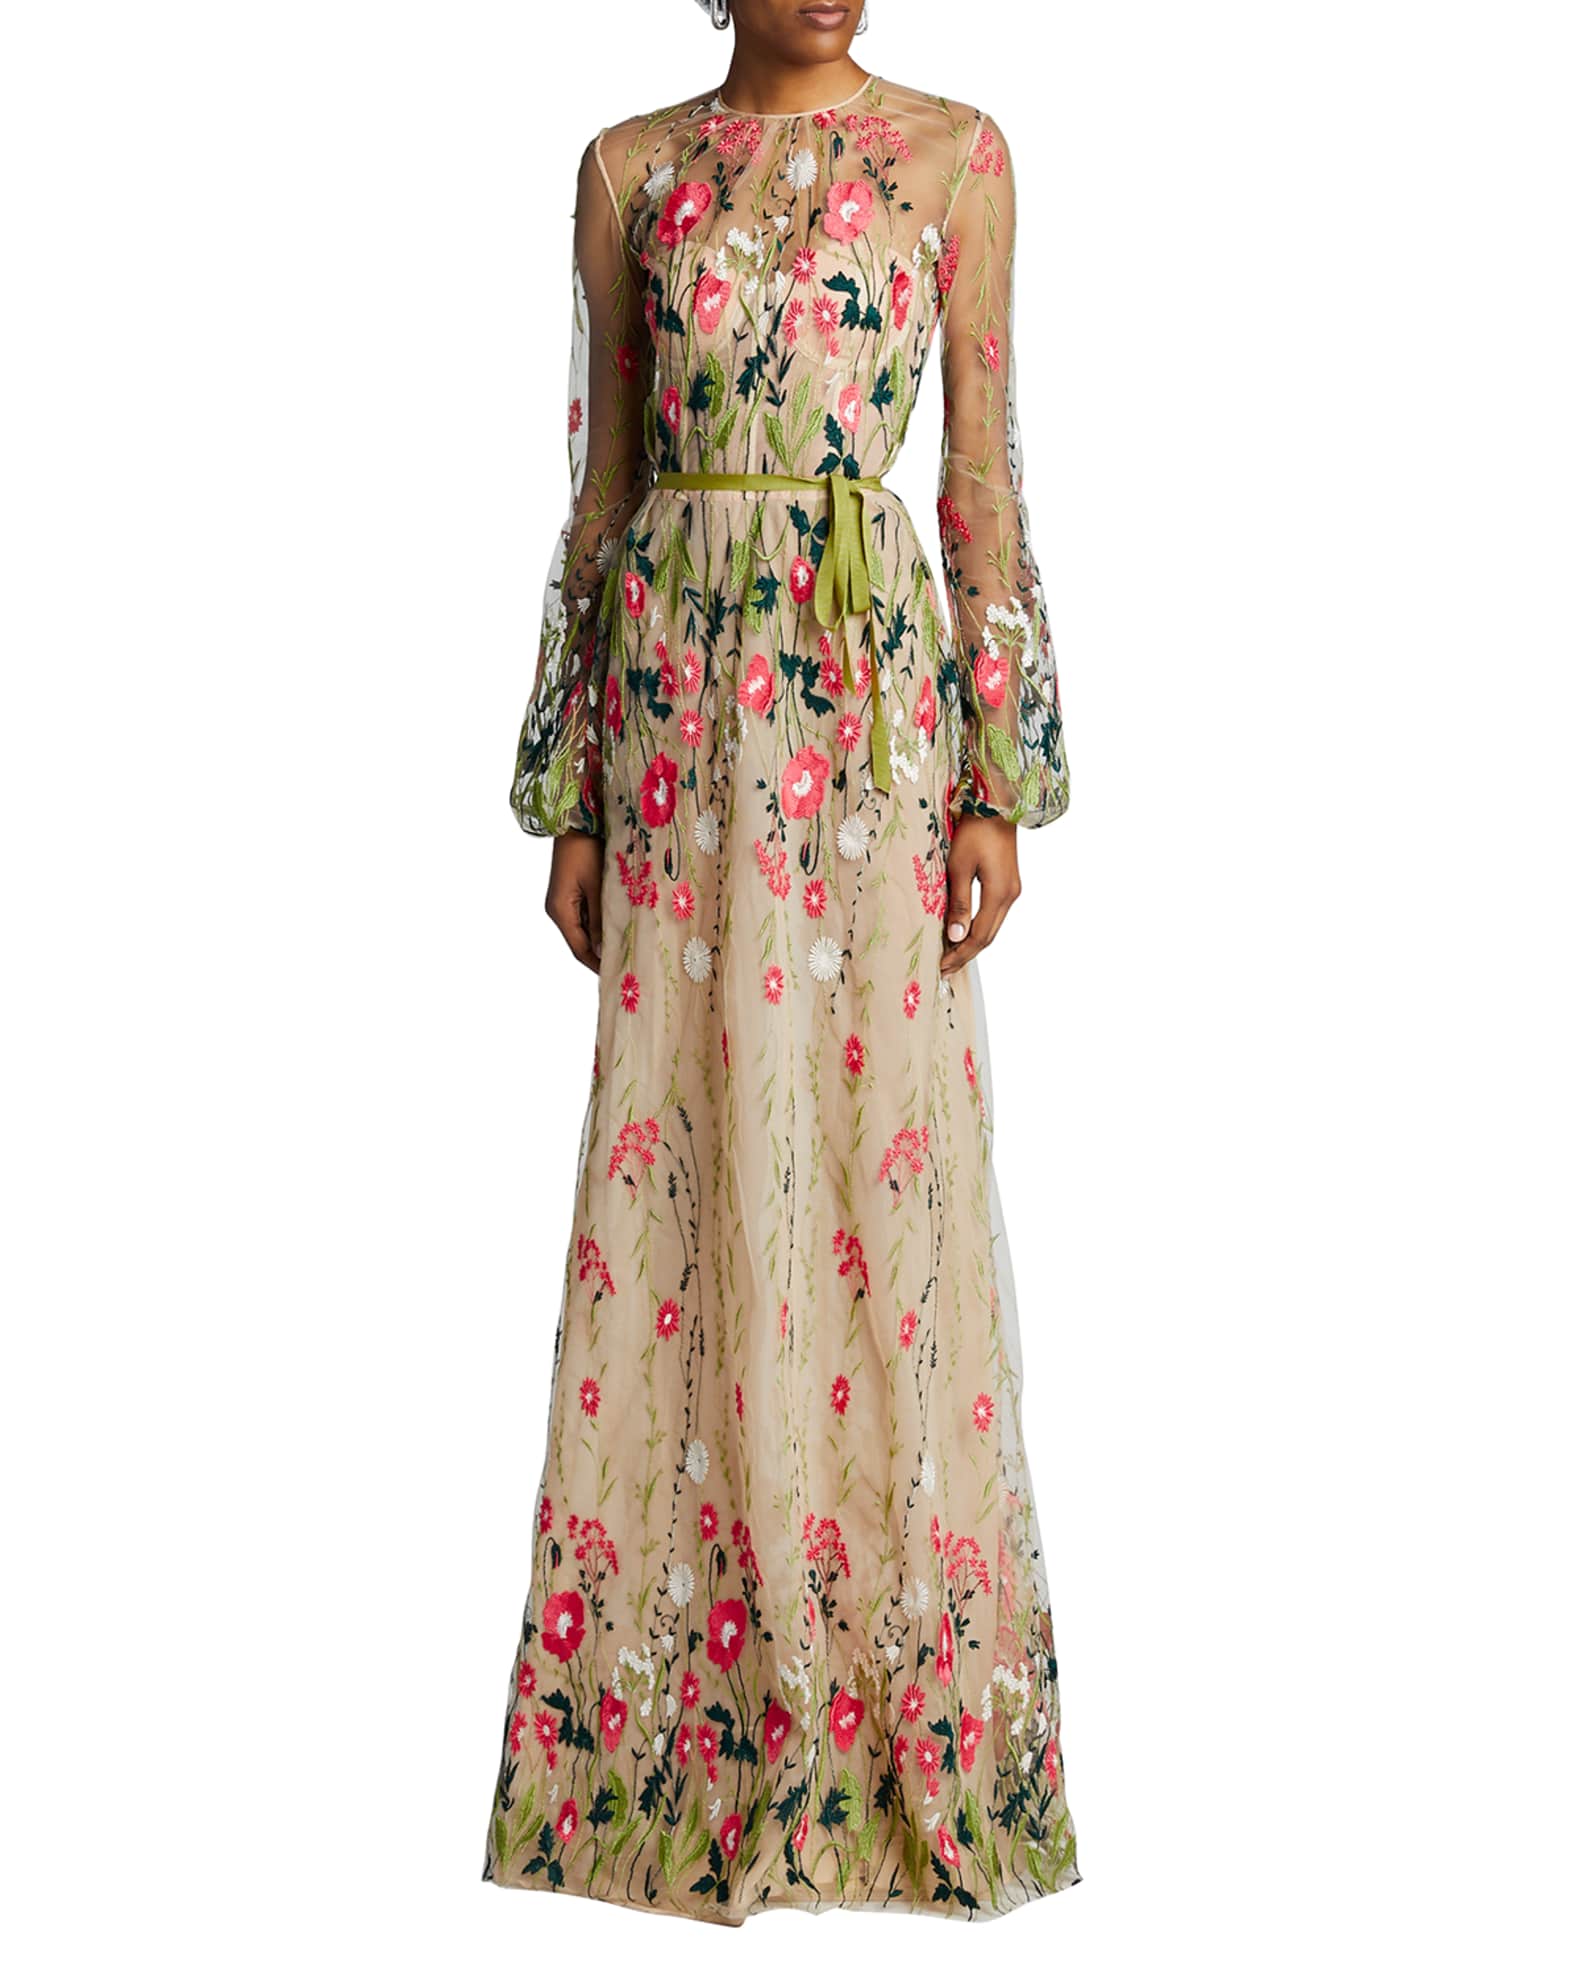 Sheer Floral Applique Gown with Belt